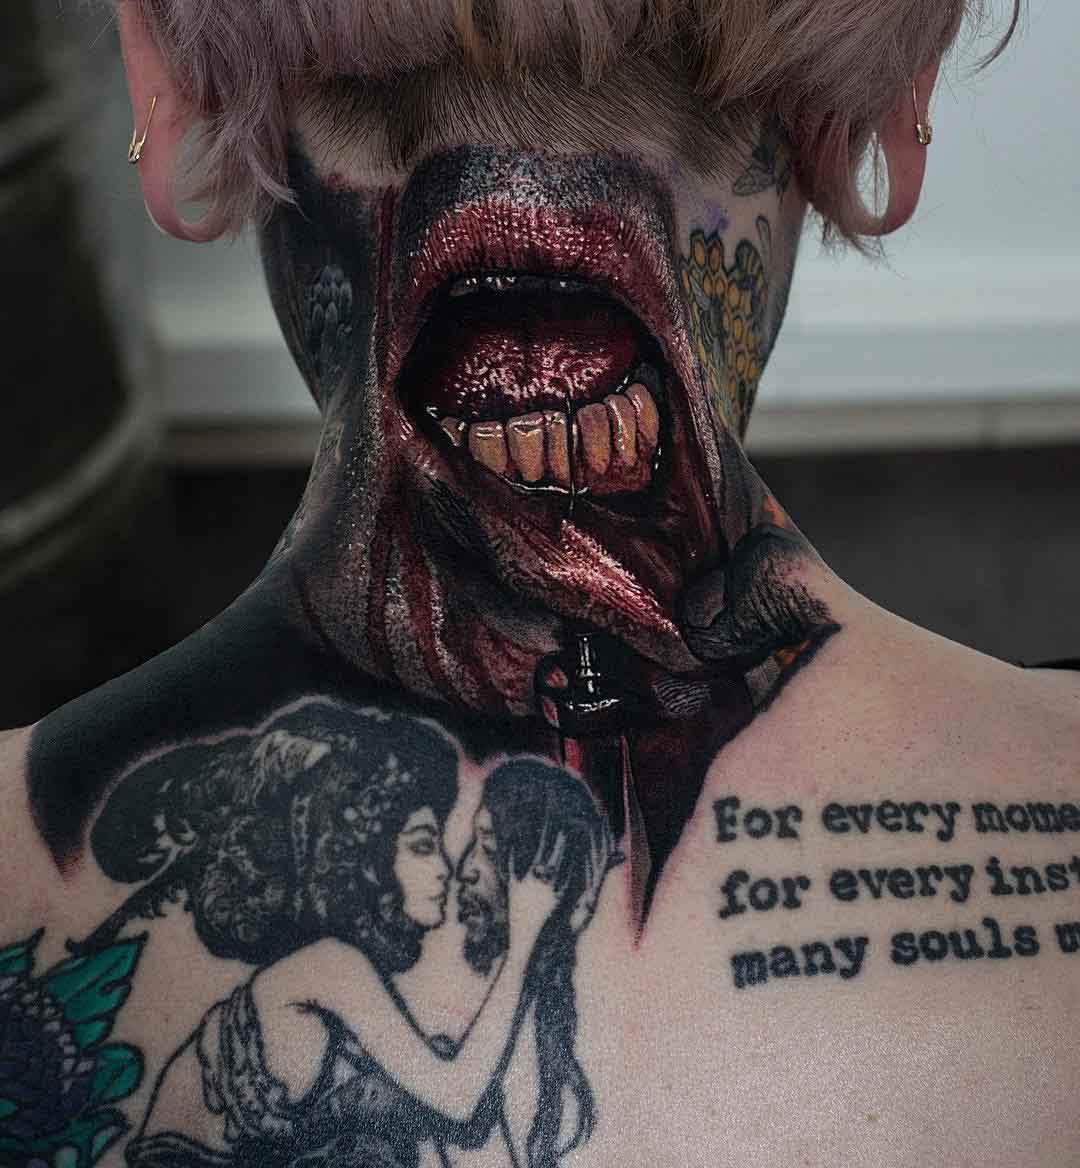 back neck tattoo lips with blood